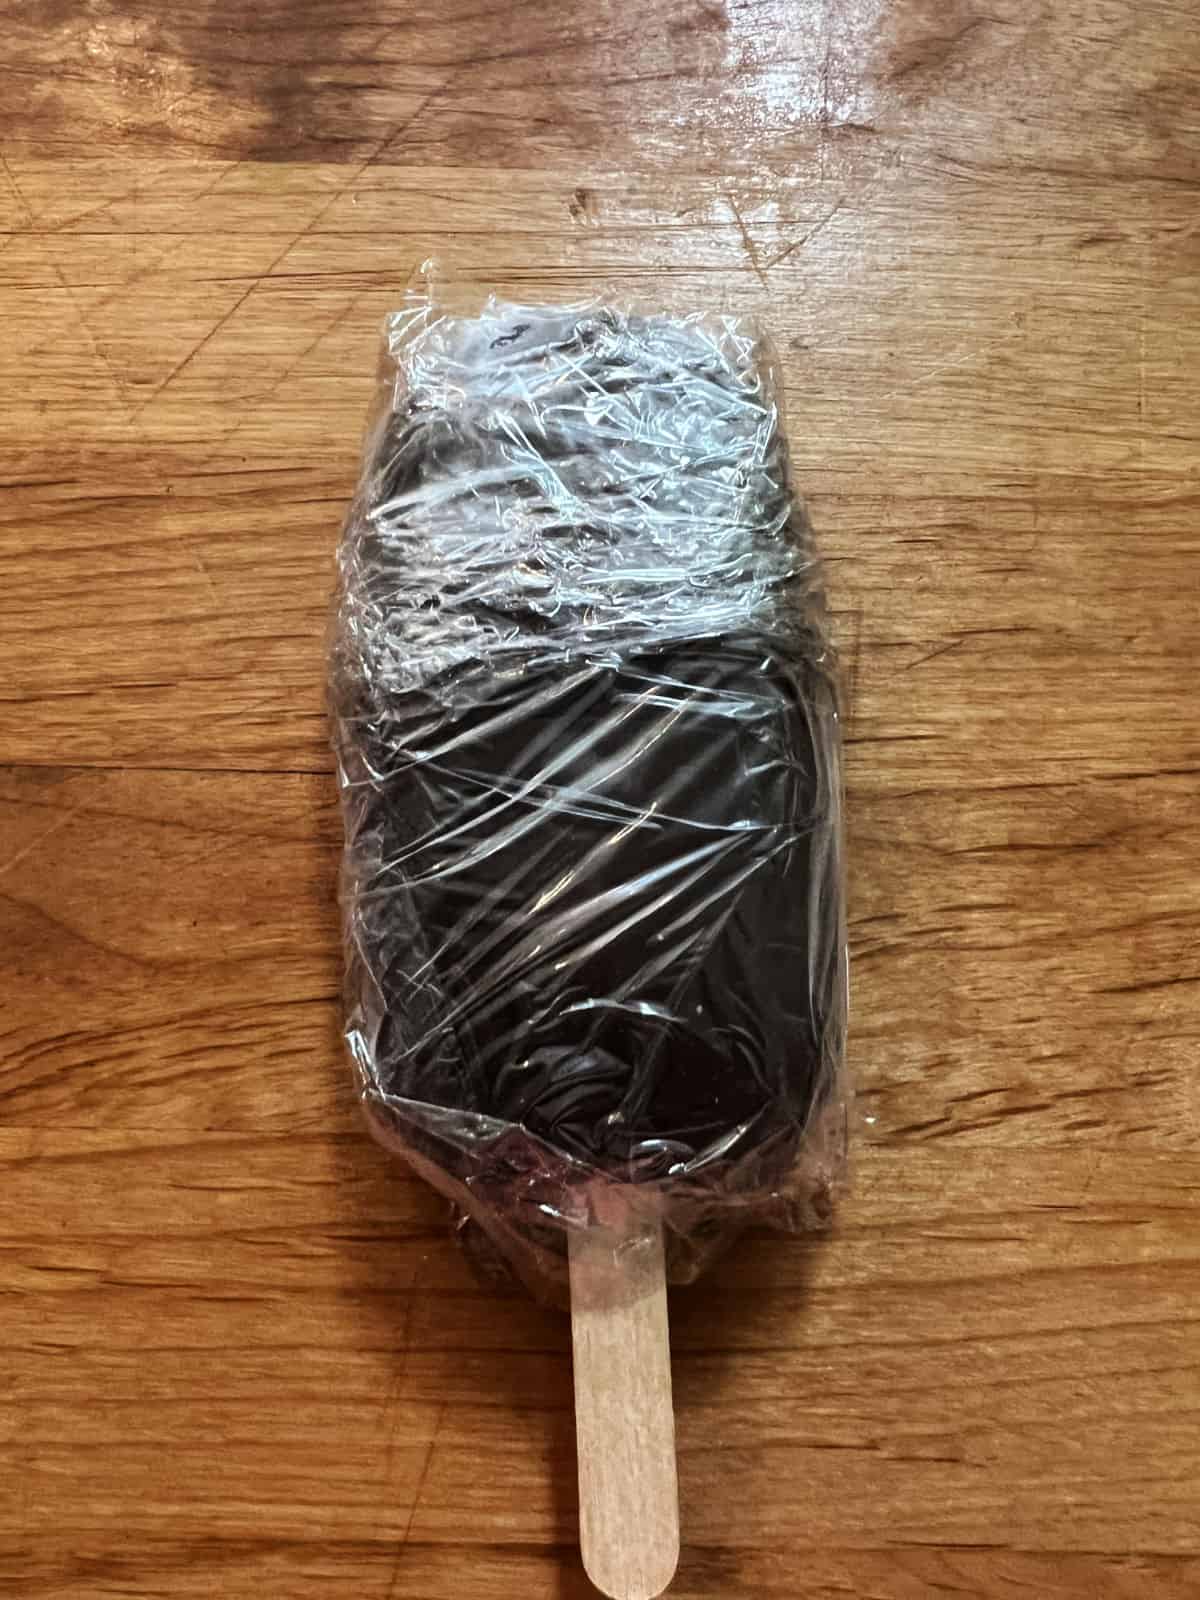 Homemade fudgesicle removed from mold and wrapped in plastic wrap.